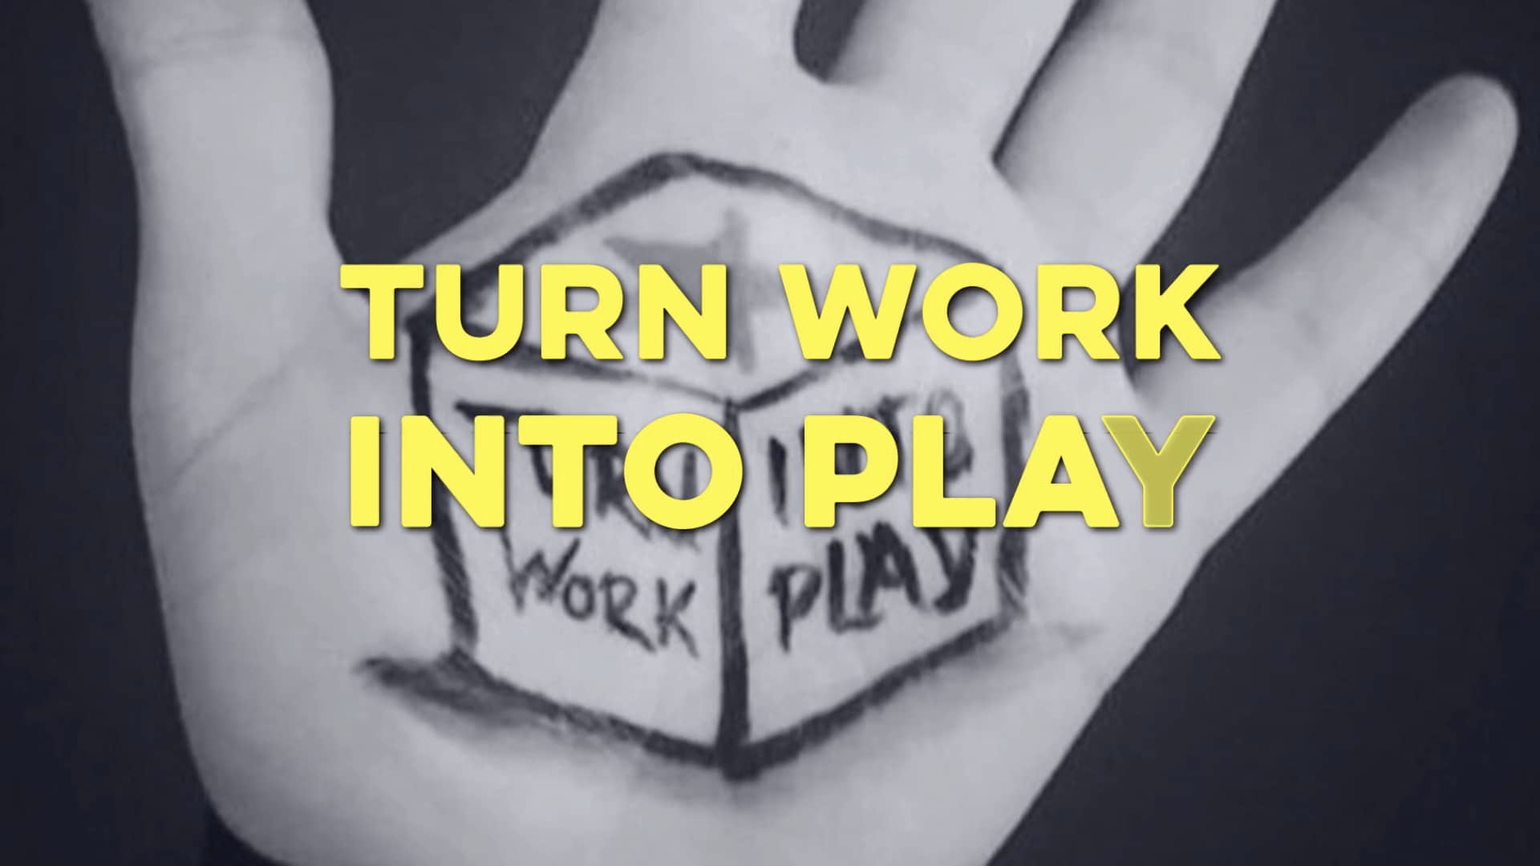 Turn work into play